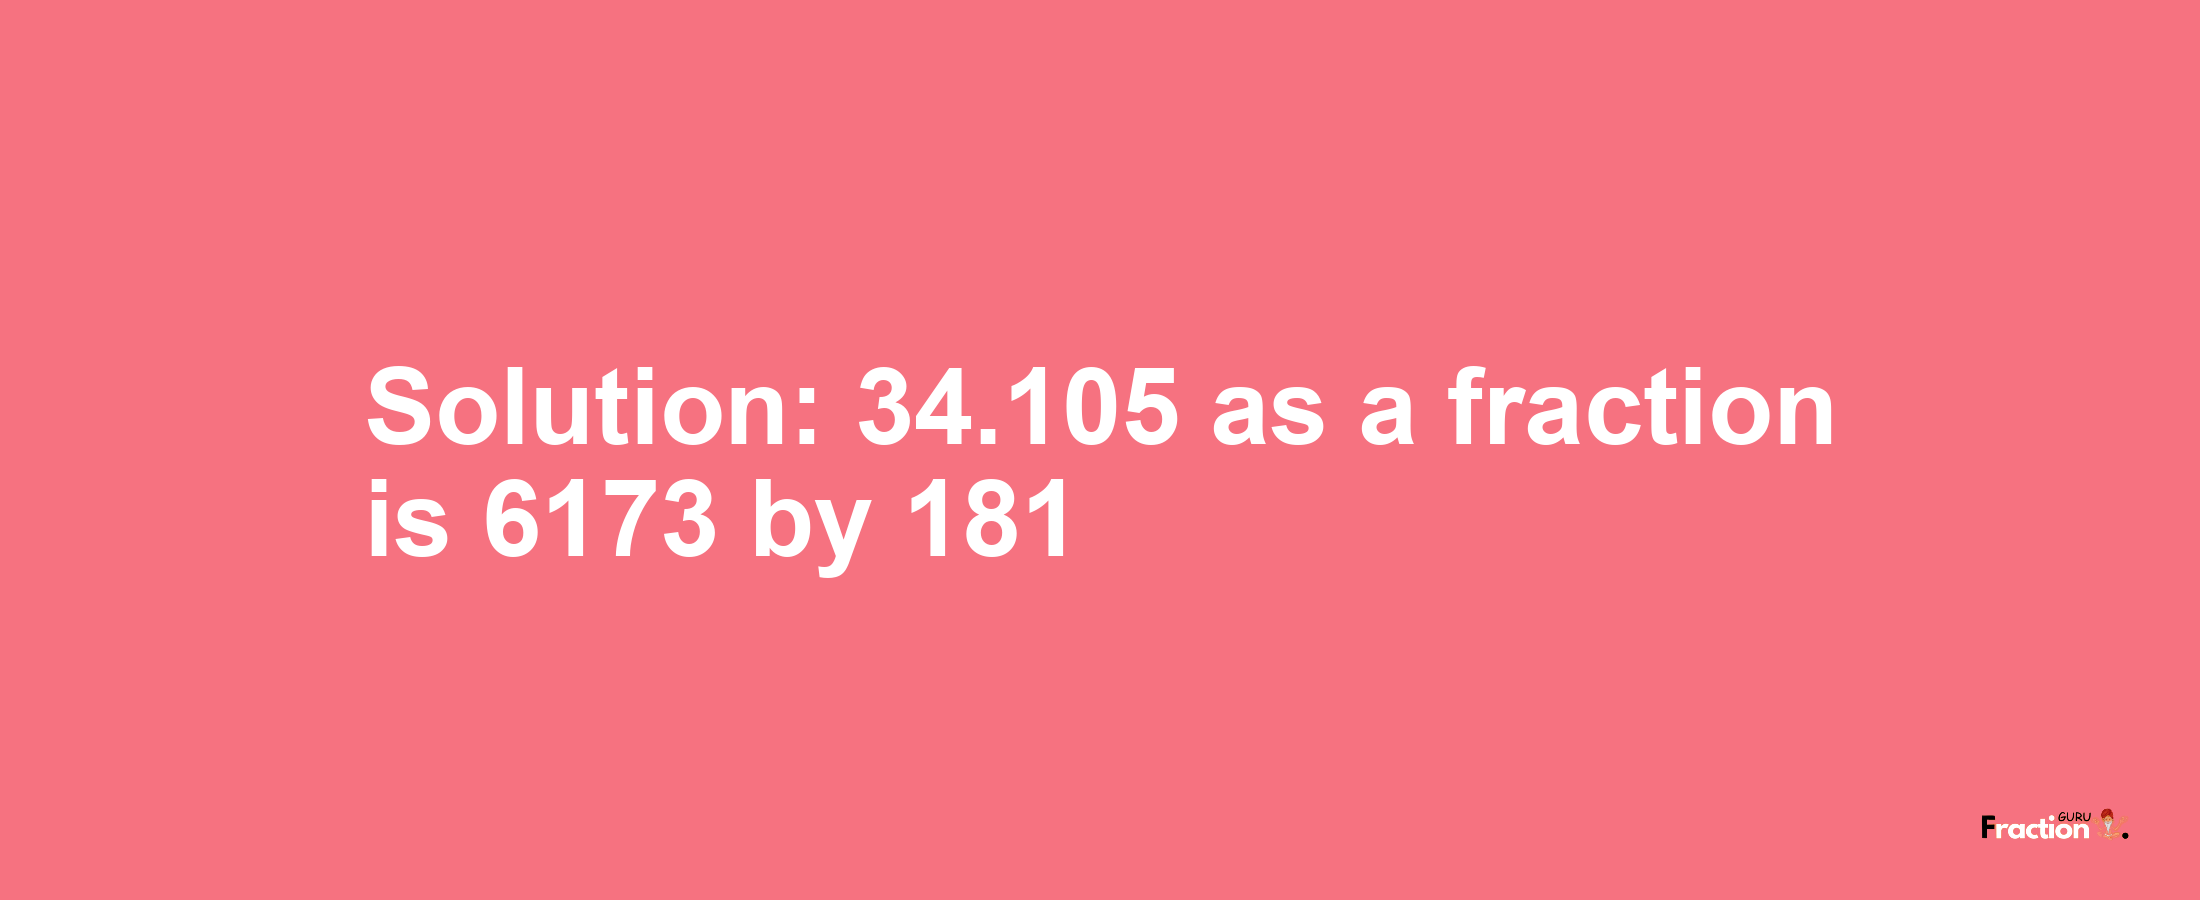 Solution:34.105 as a fraction is 6173/181